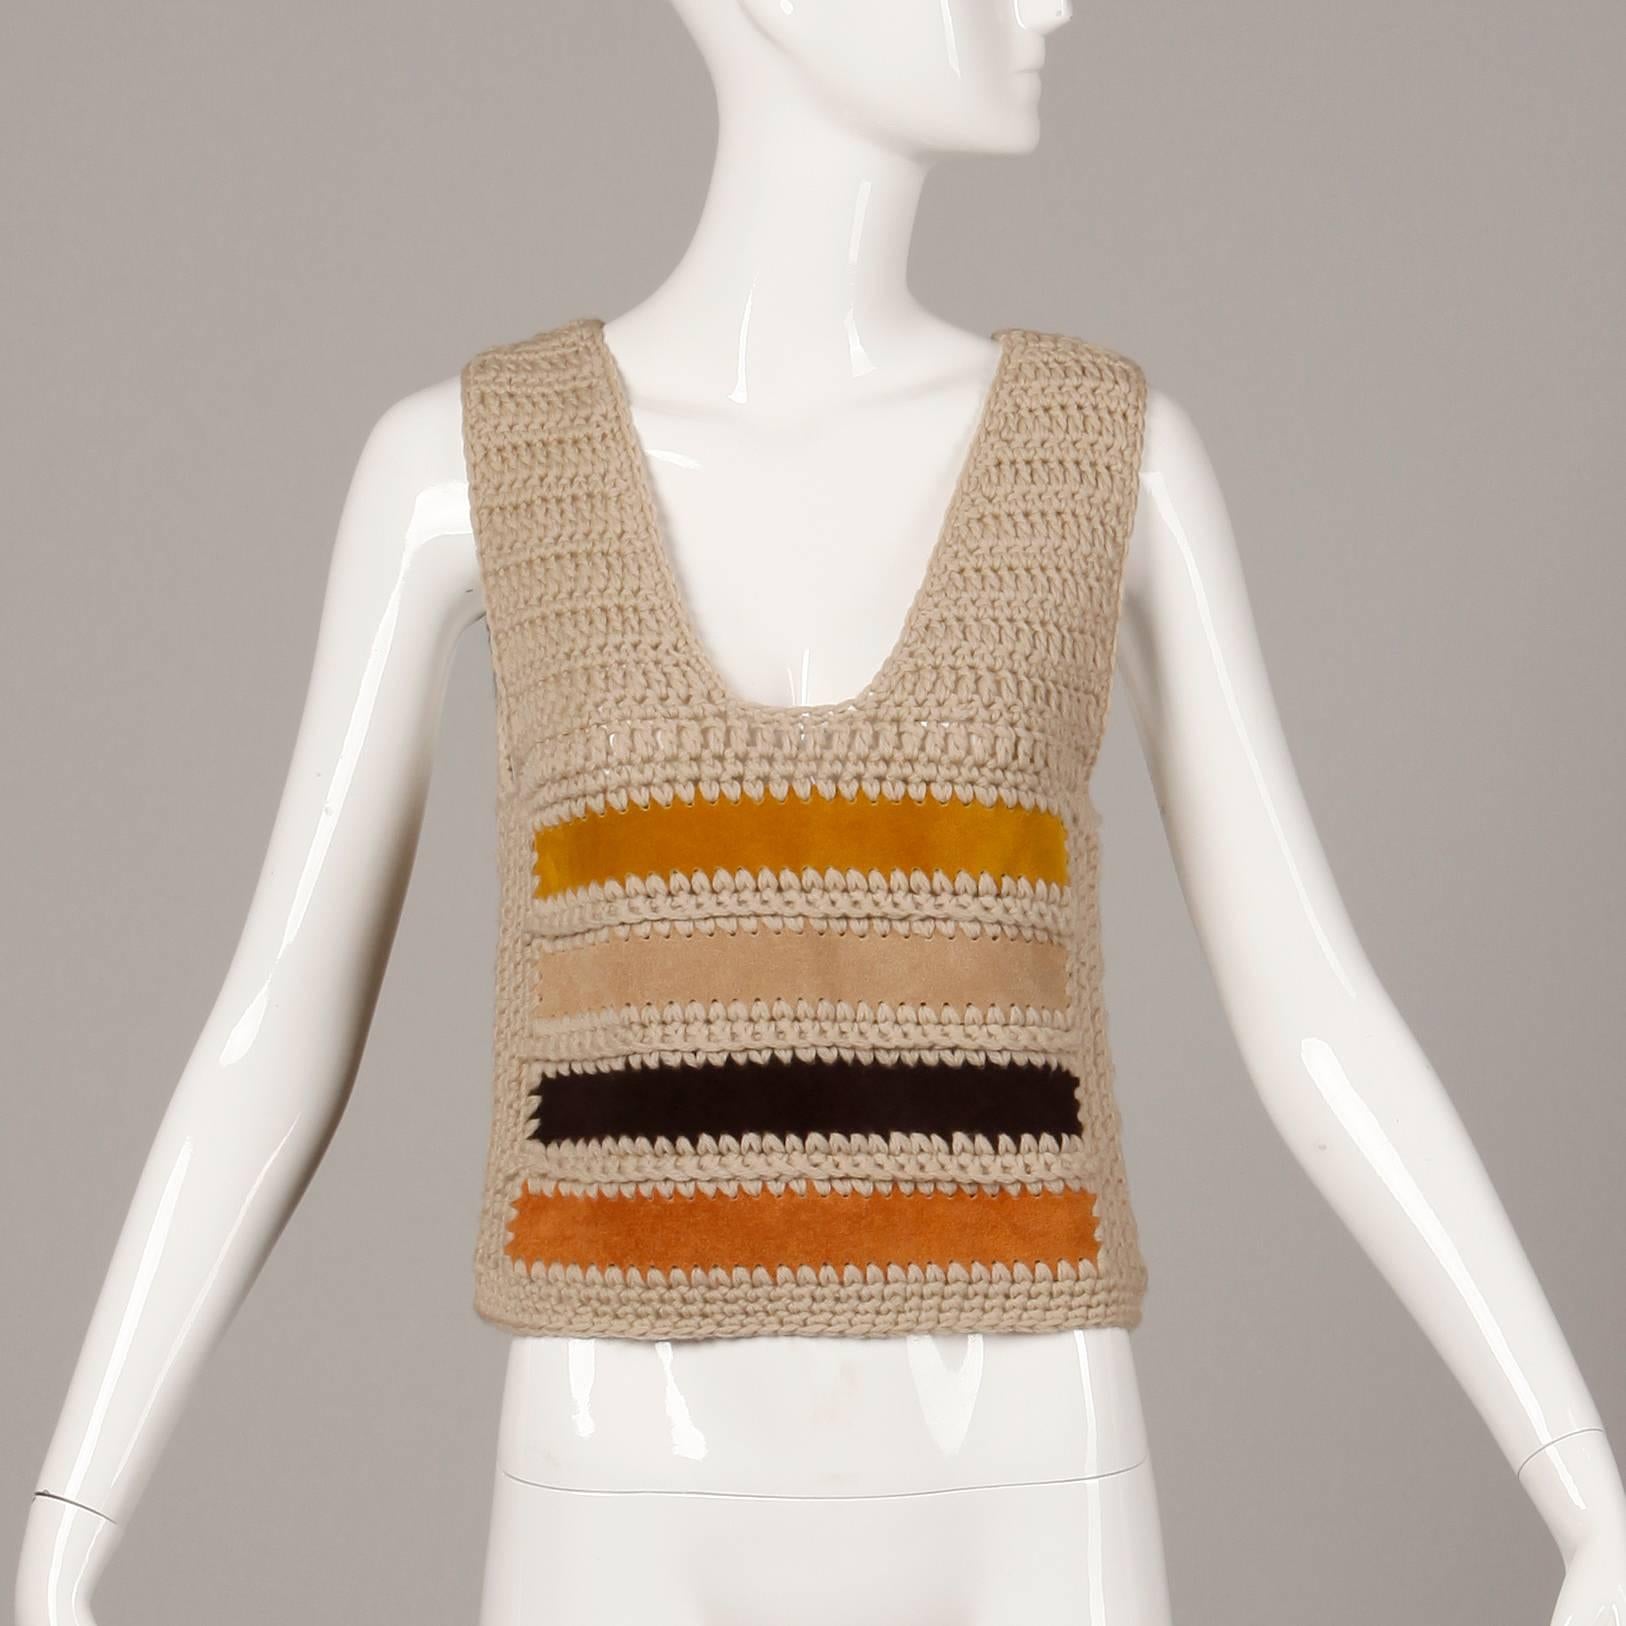 Vintage 1970s color block sweater vest by Saks Fifth Avenue with genuine suede leather stripes. Unlined with no closure (pulls on over head). 100% wool with suede leather stripes. Fits like a modern size small-medium. Measurements taken unstretched.